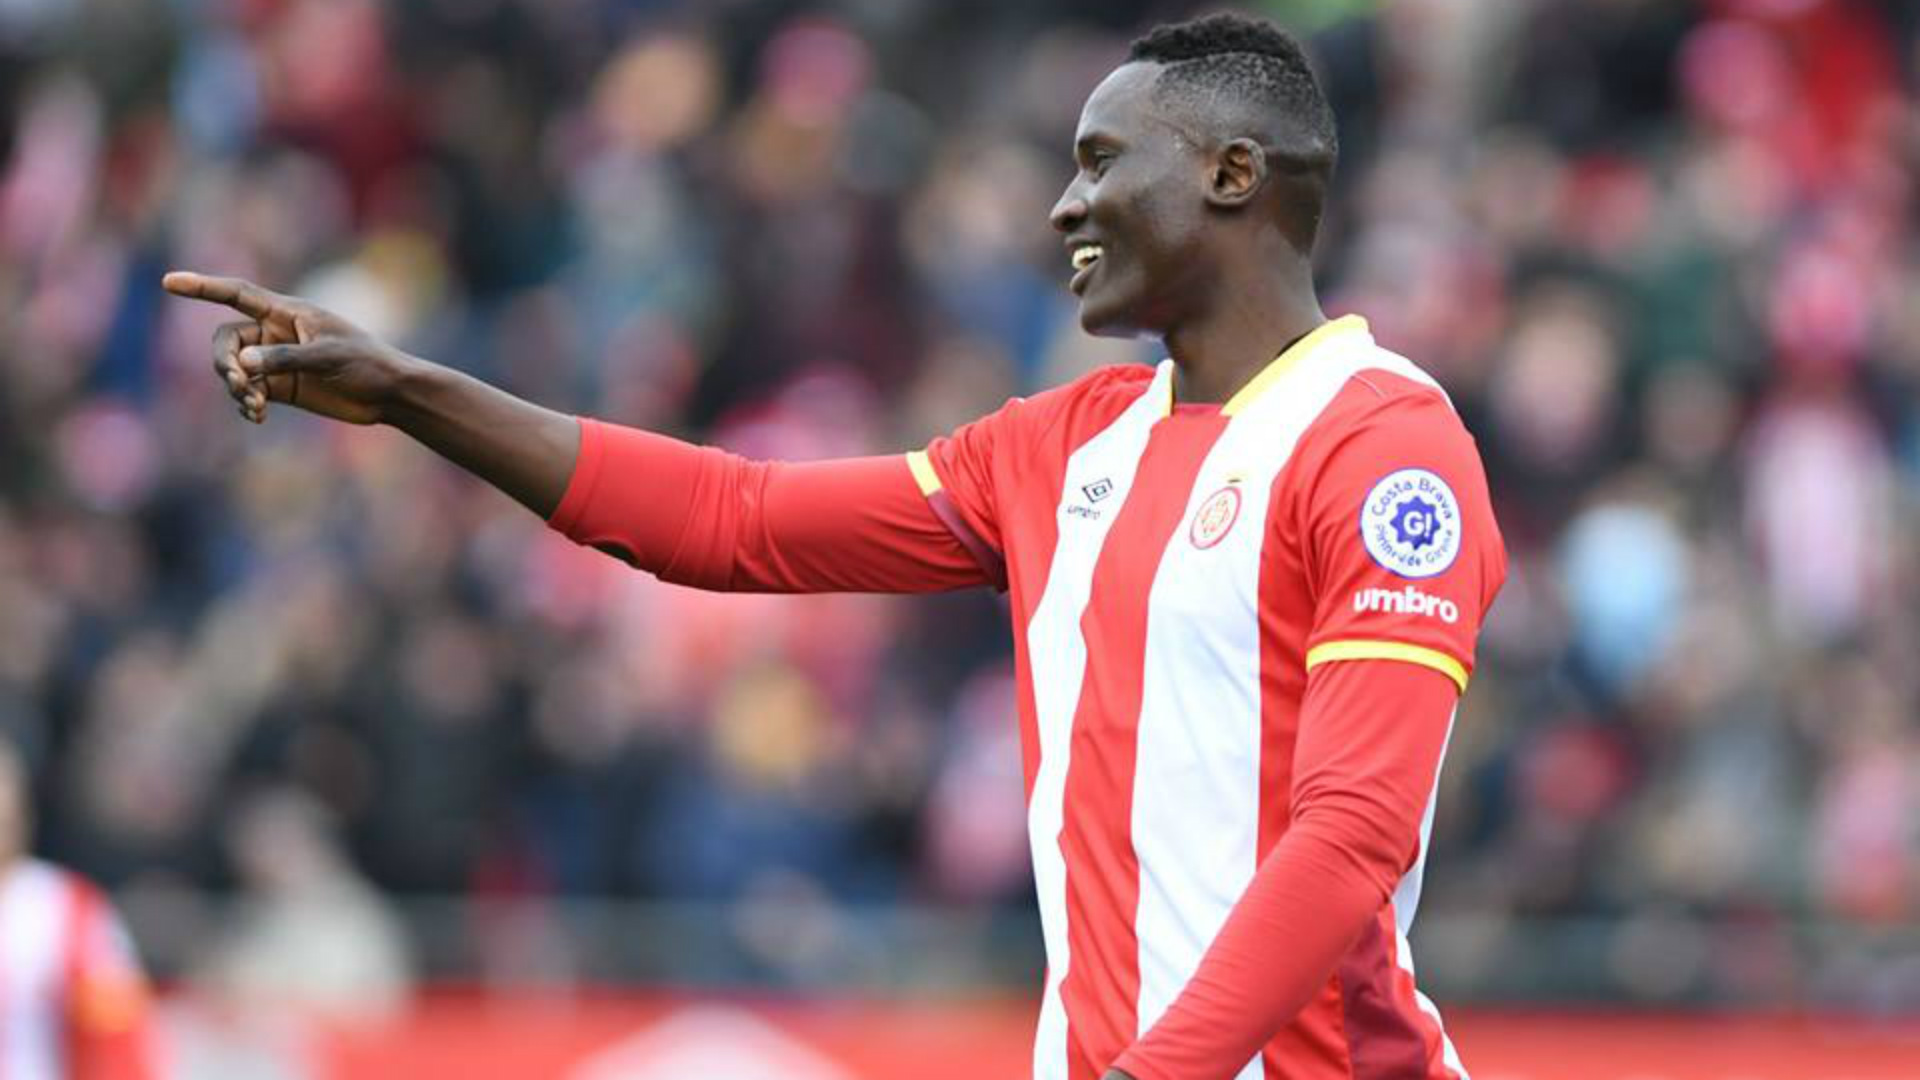 Olunga's agent Isse blames Manchester City and Nigeria's Kayode for Girona frustration